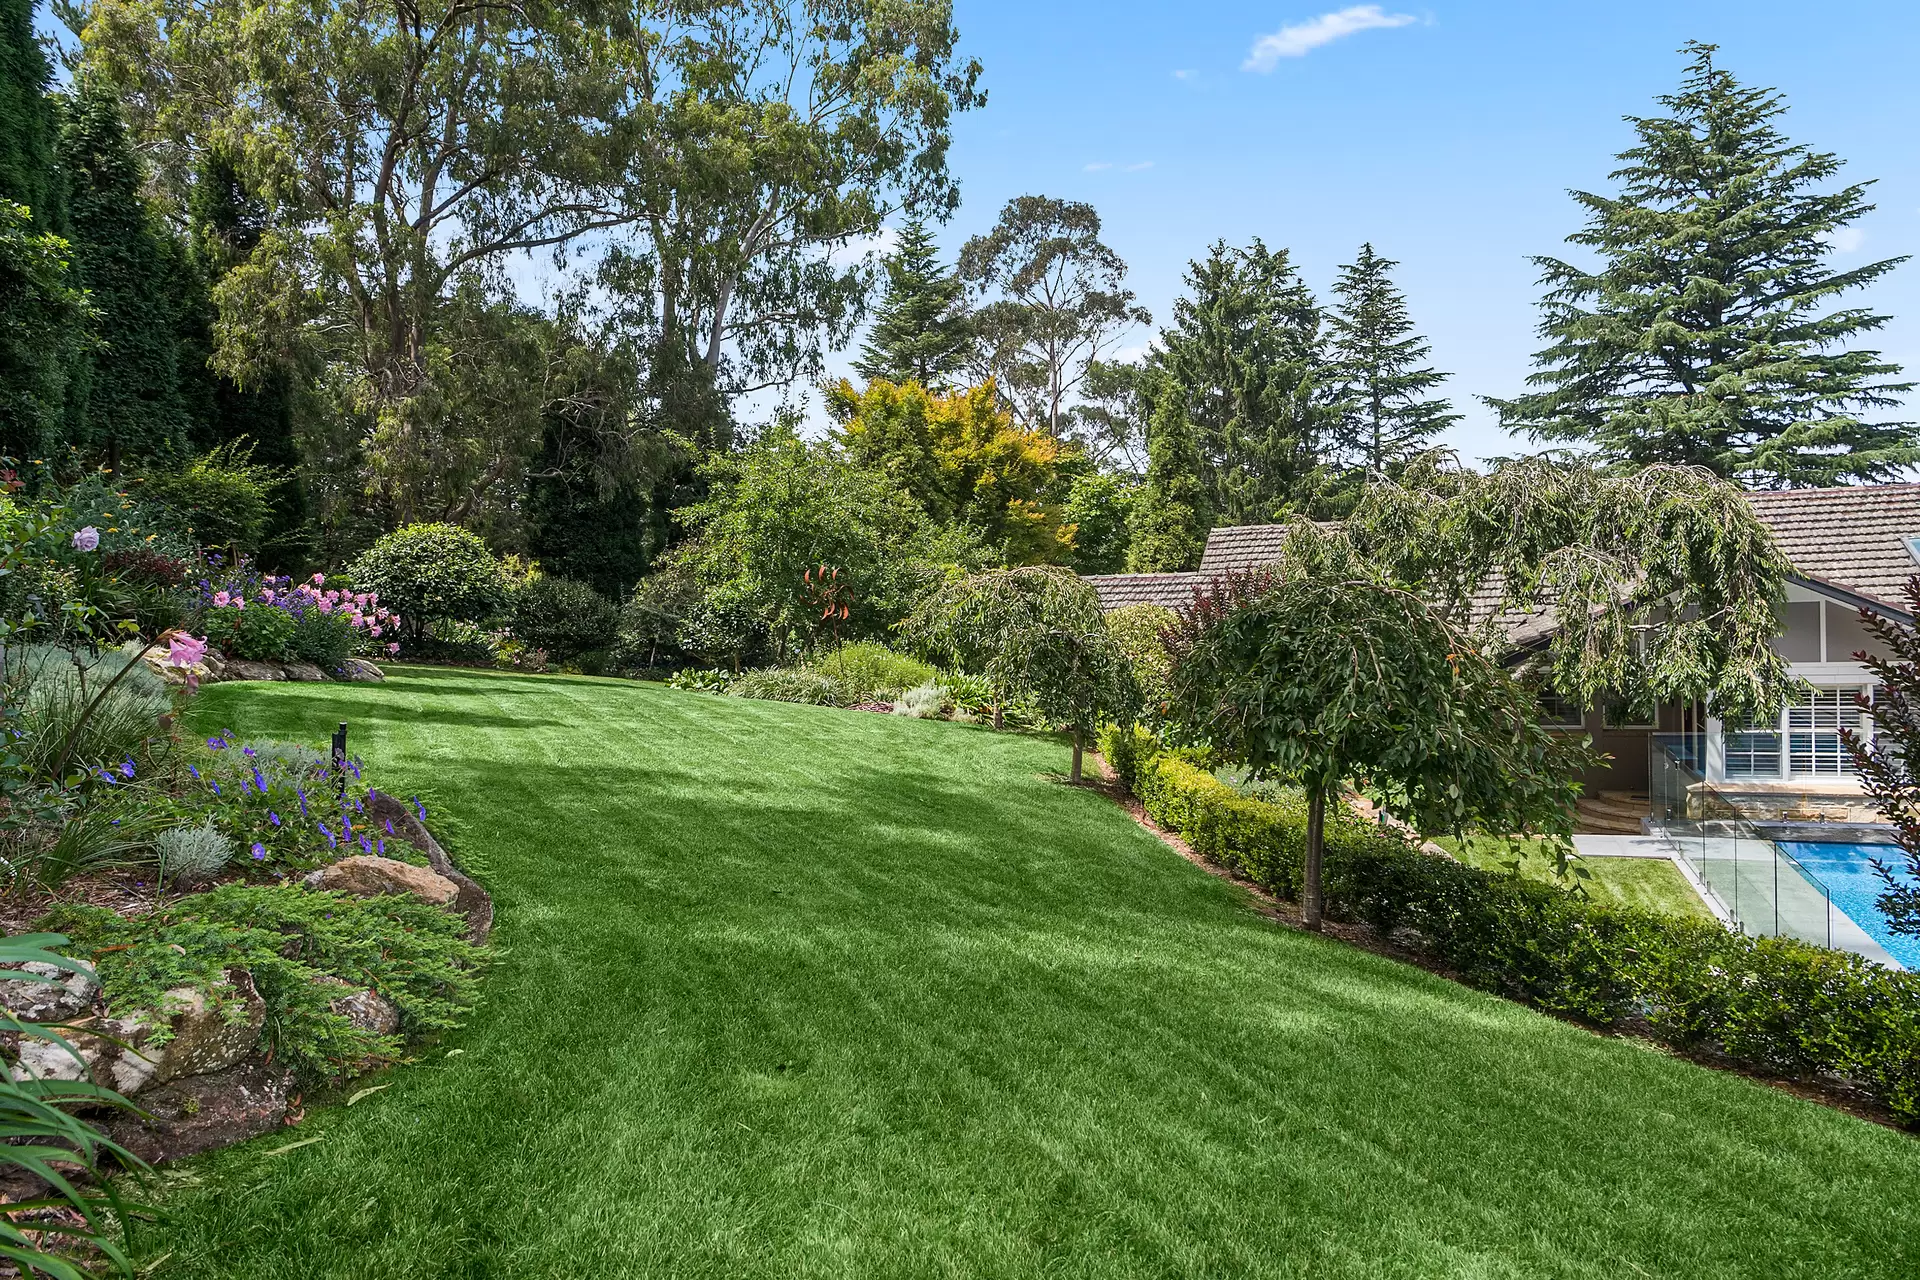 Photo #16: 10 St Clair Street, Bowral - Sold by Drew Lindsay Sotheby's International Realty